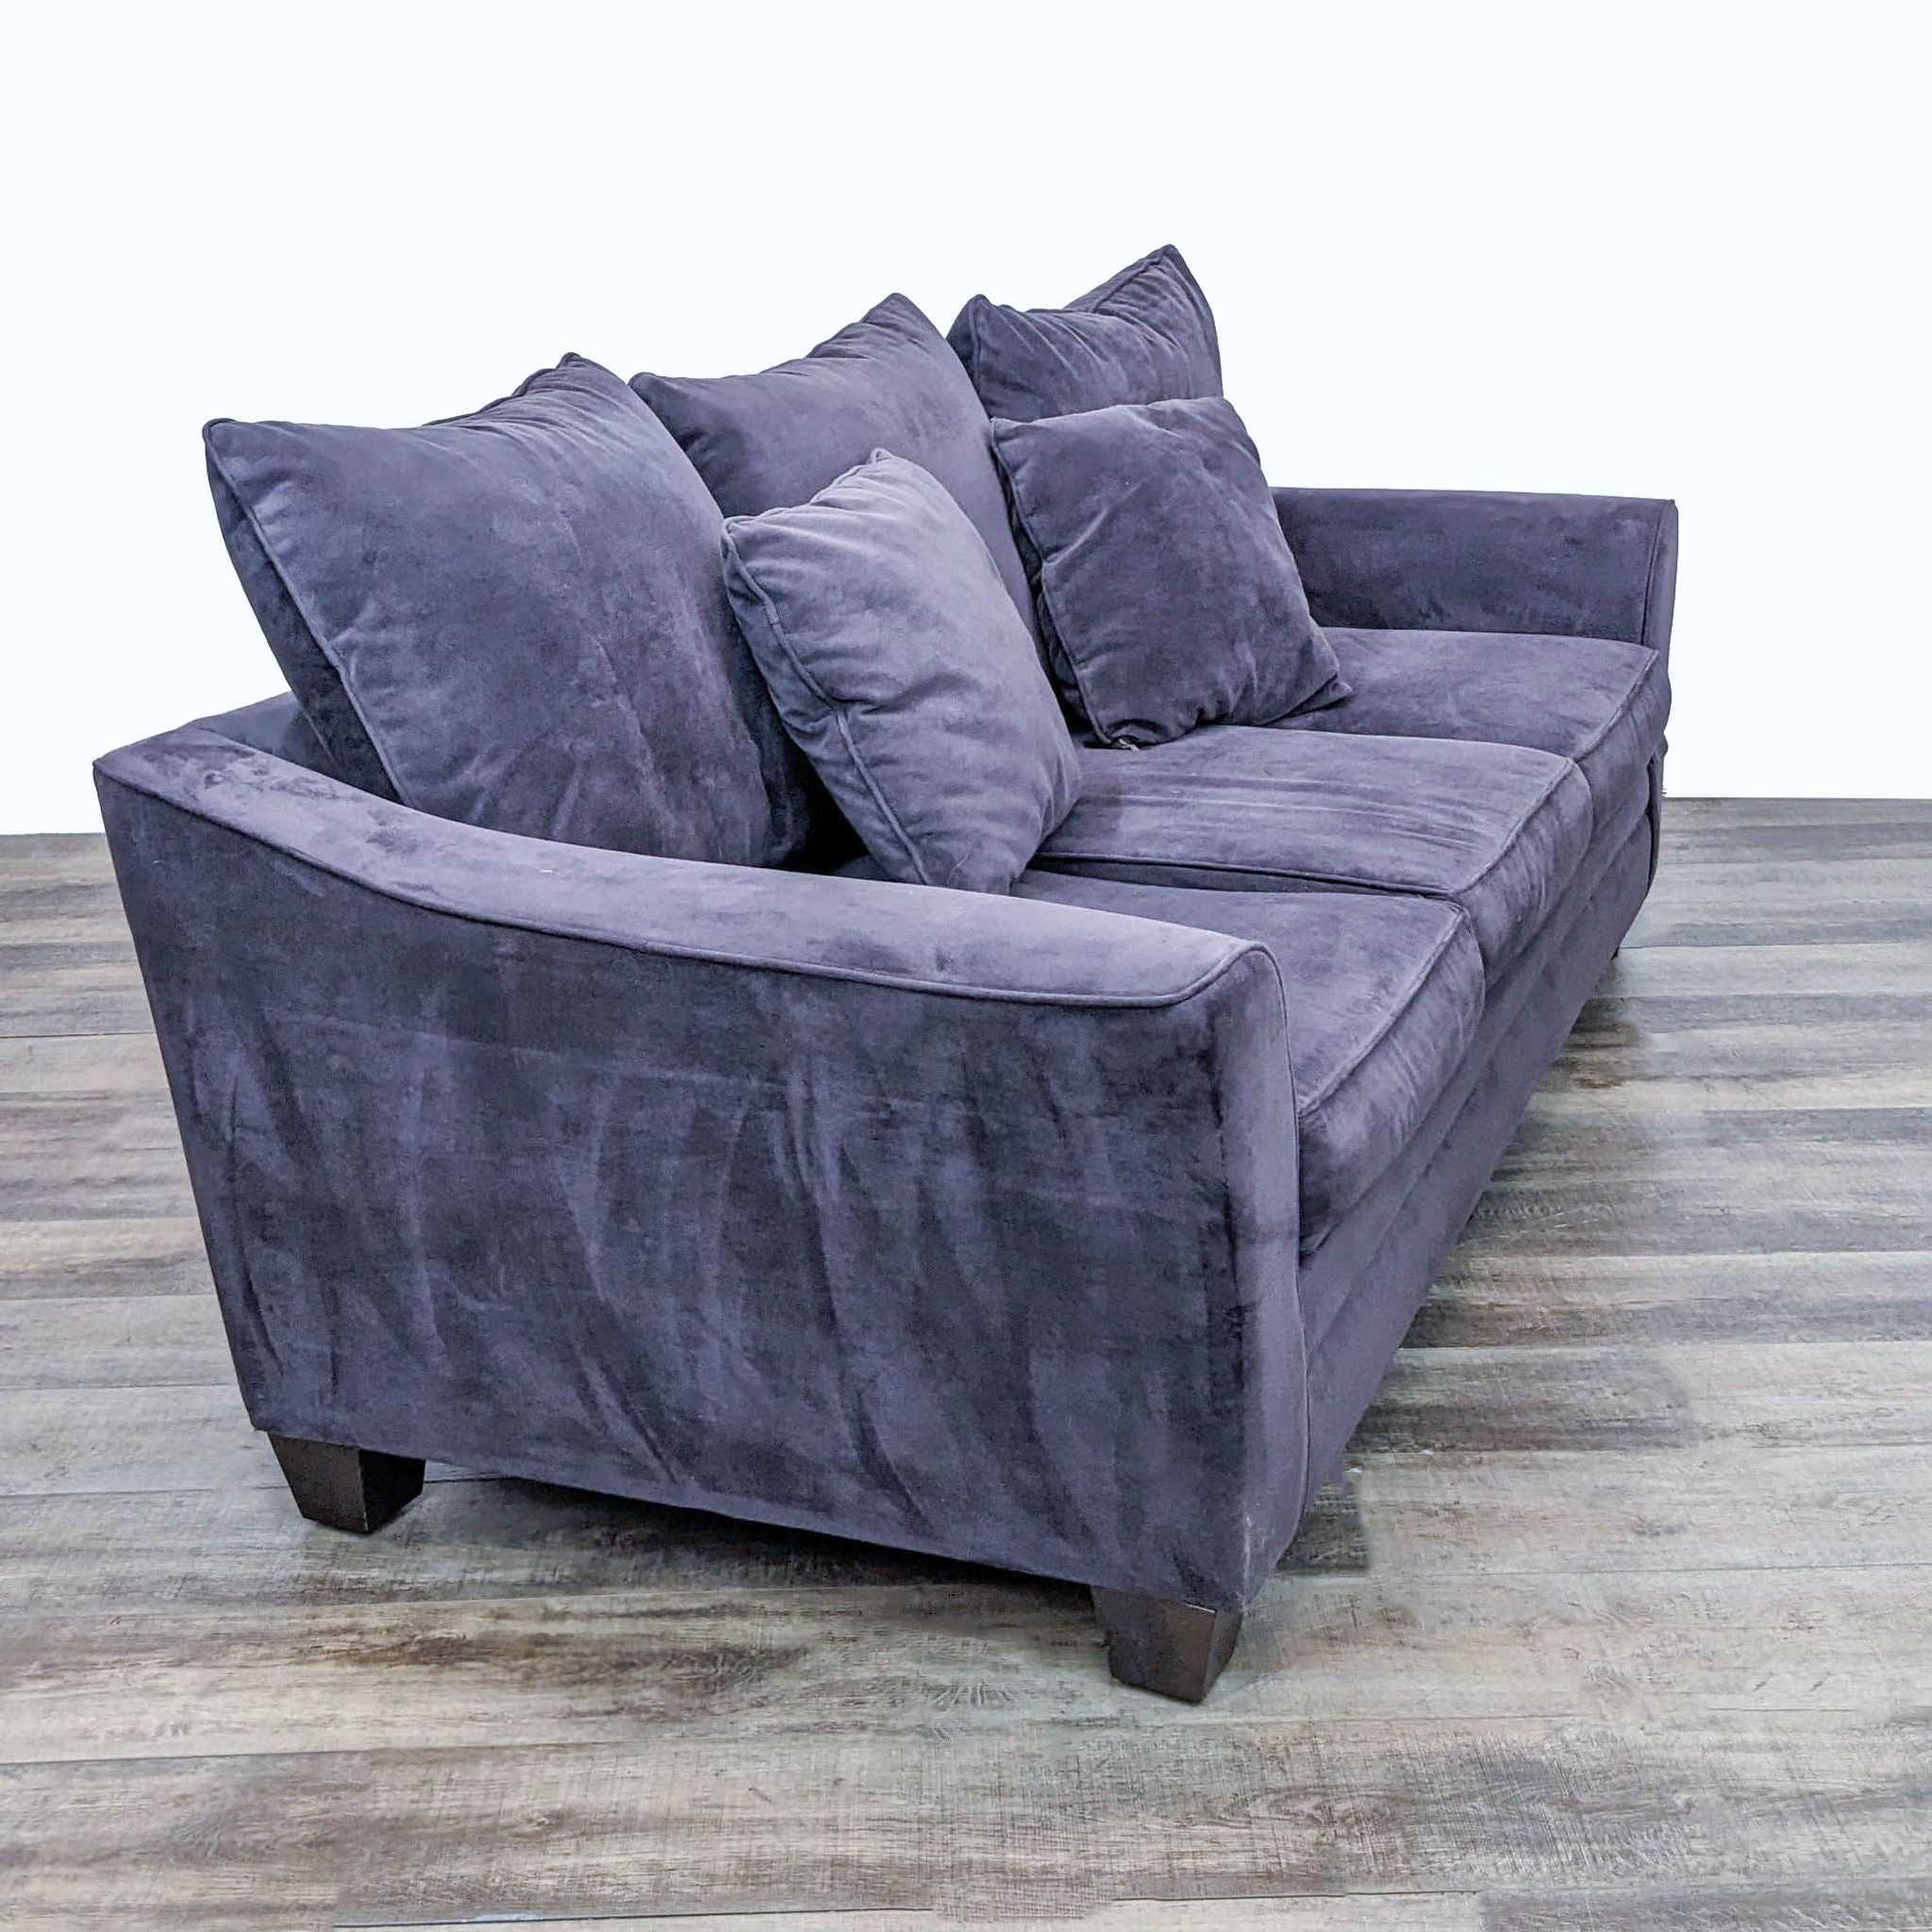 Frontal view of a Reperch 3-seater sofa with curved arms, removable back cushions, and accent pillows.